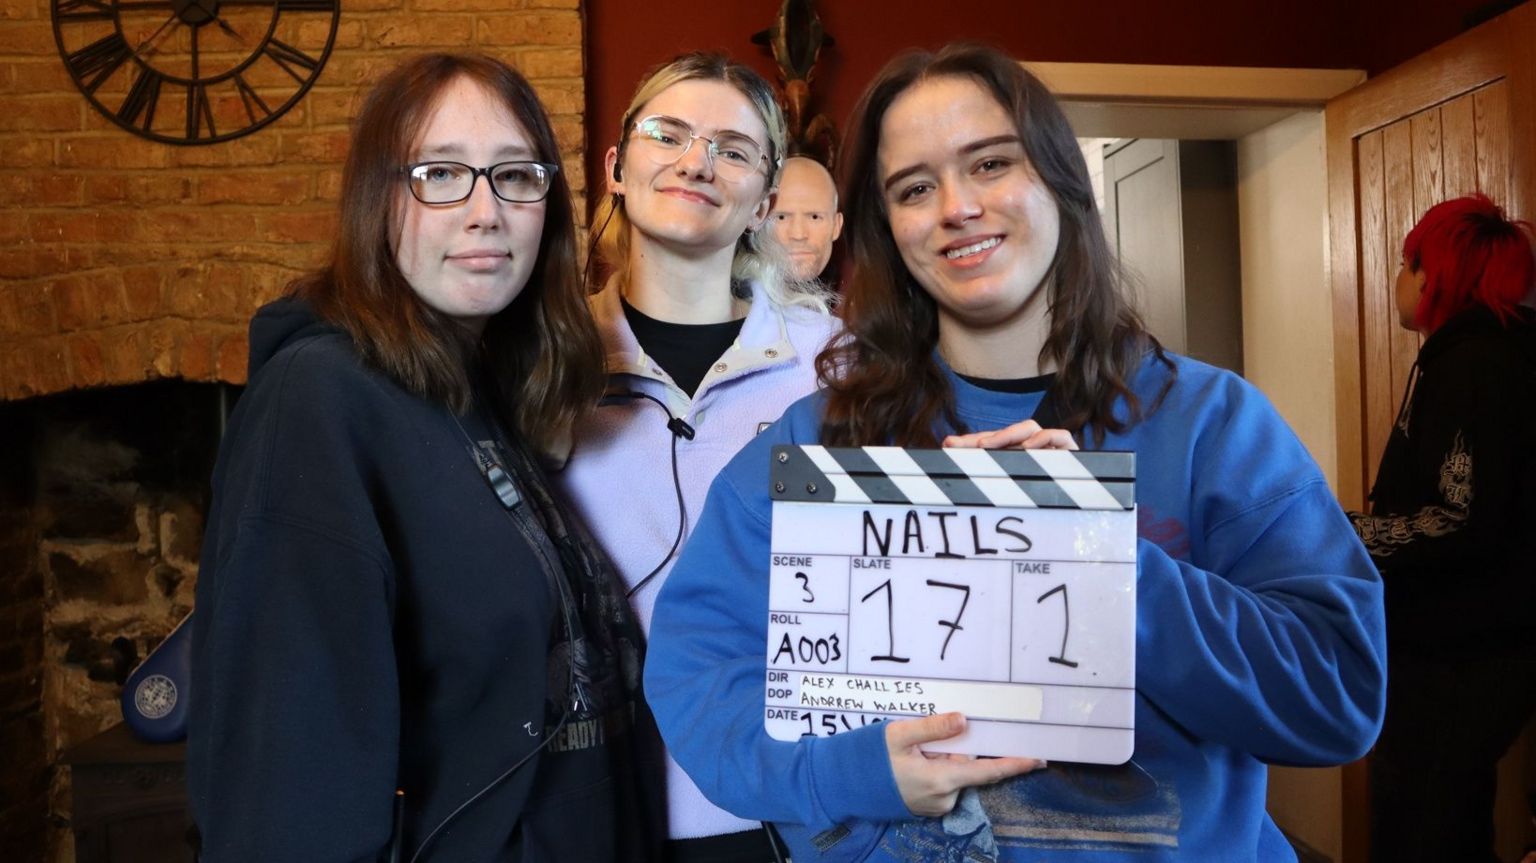 Siobhan Kayley, Lucy Wilson, and Lauren Kerr on the set of Nails